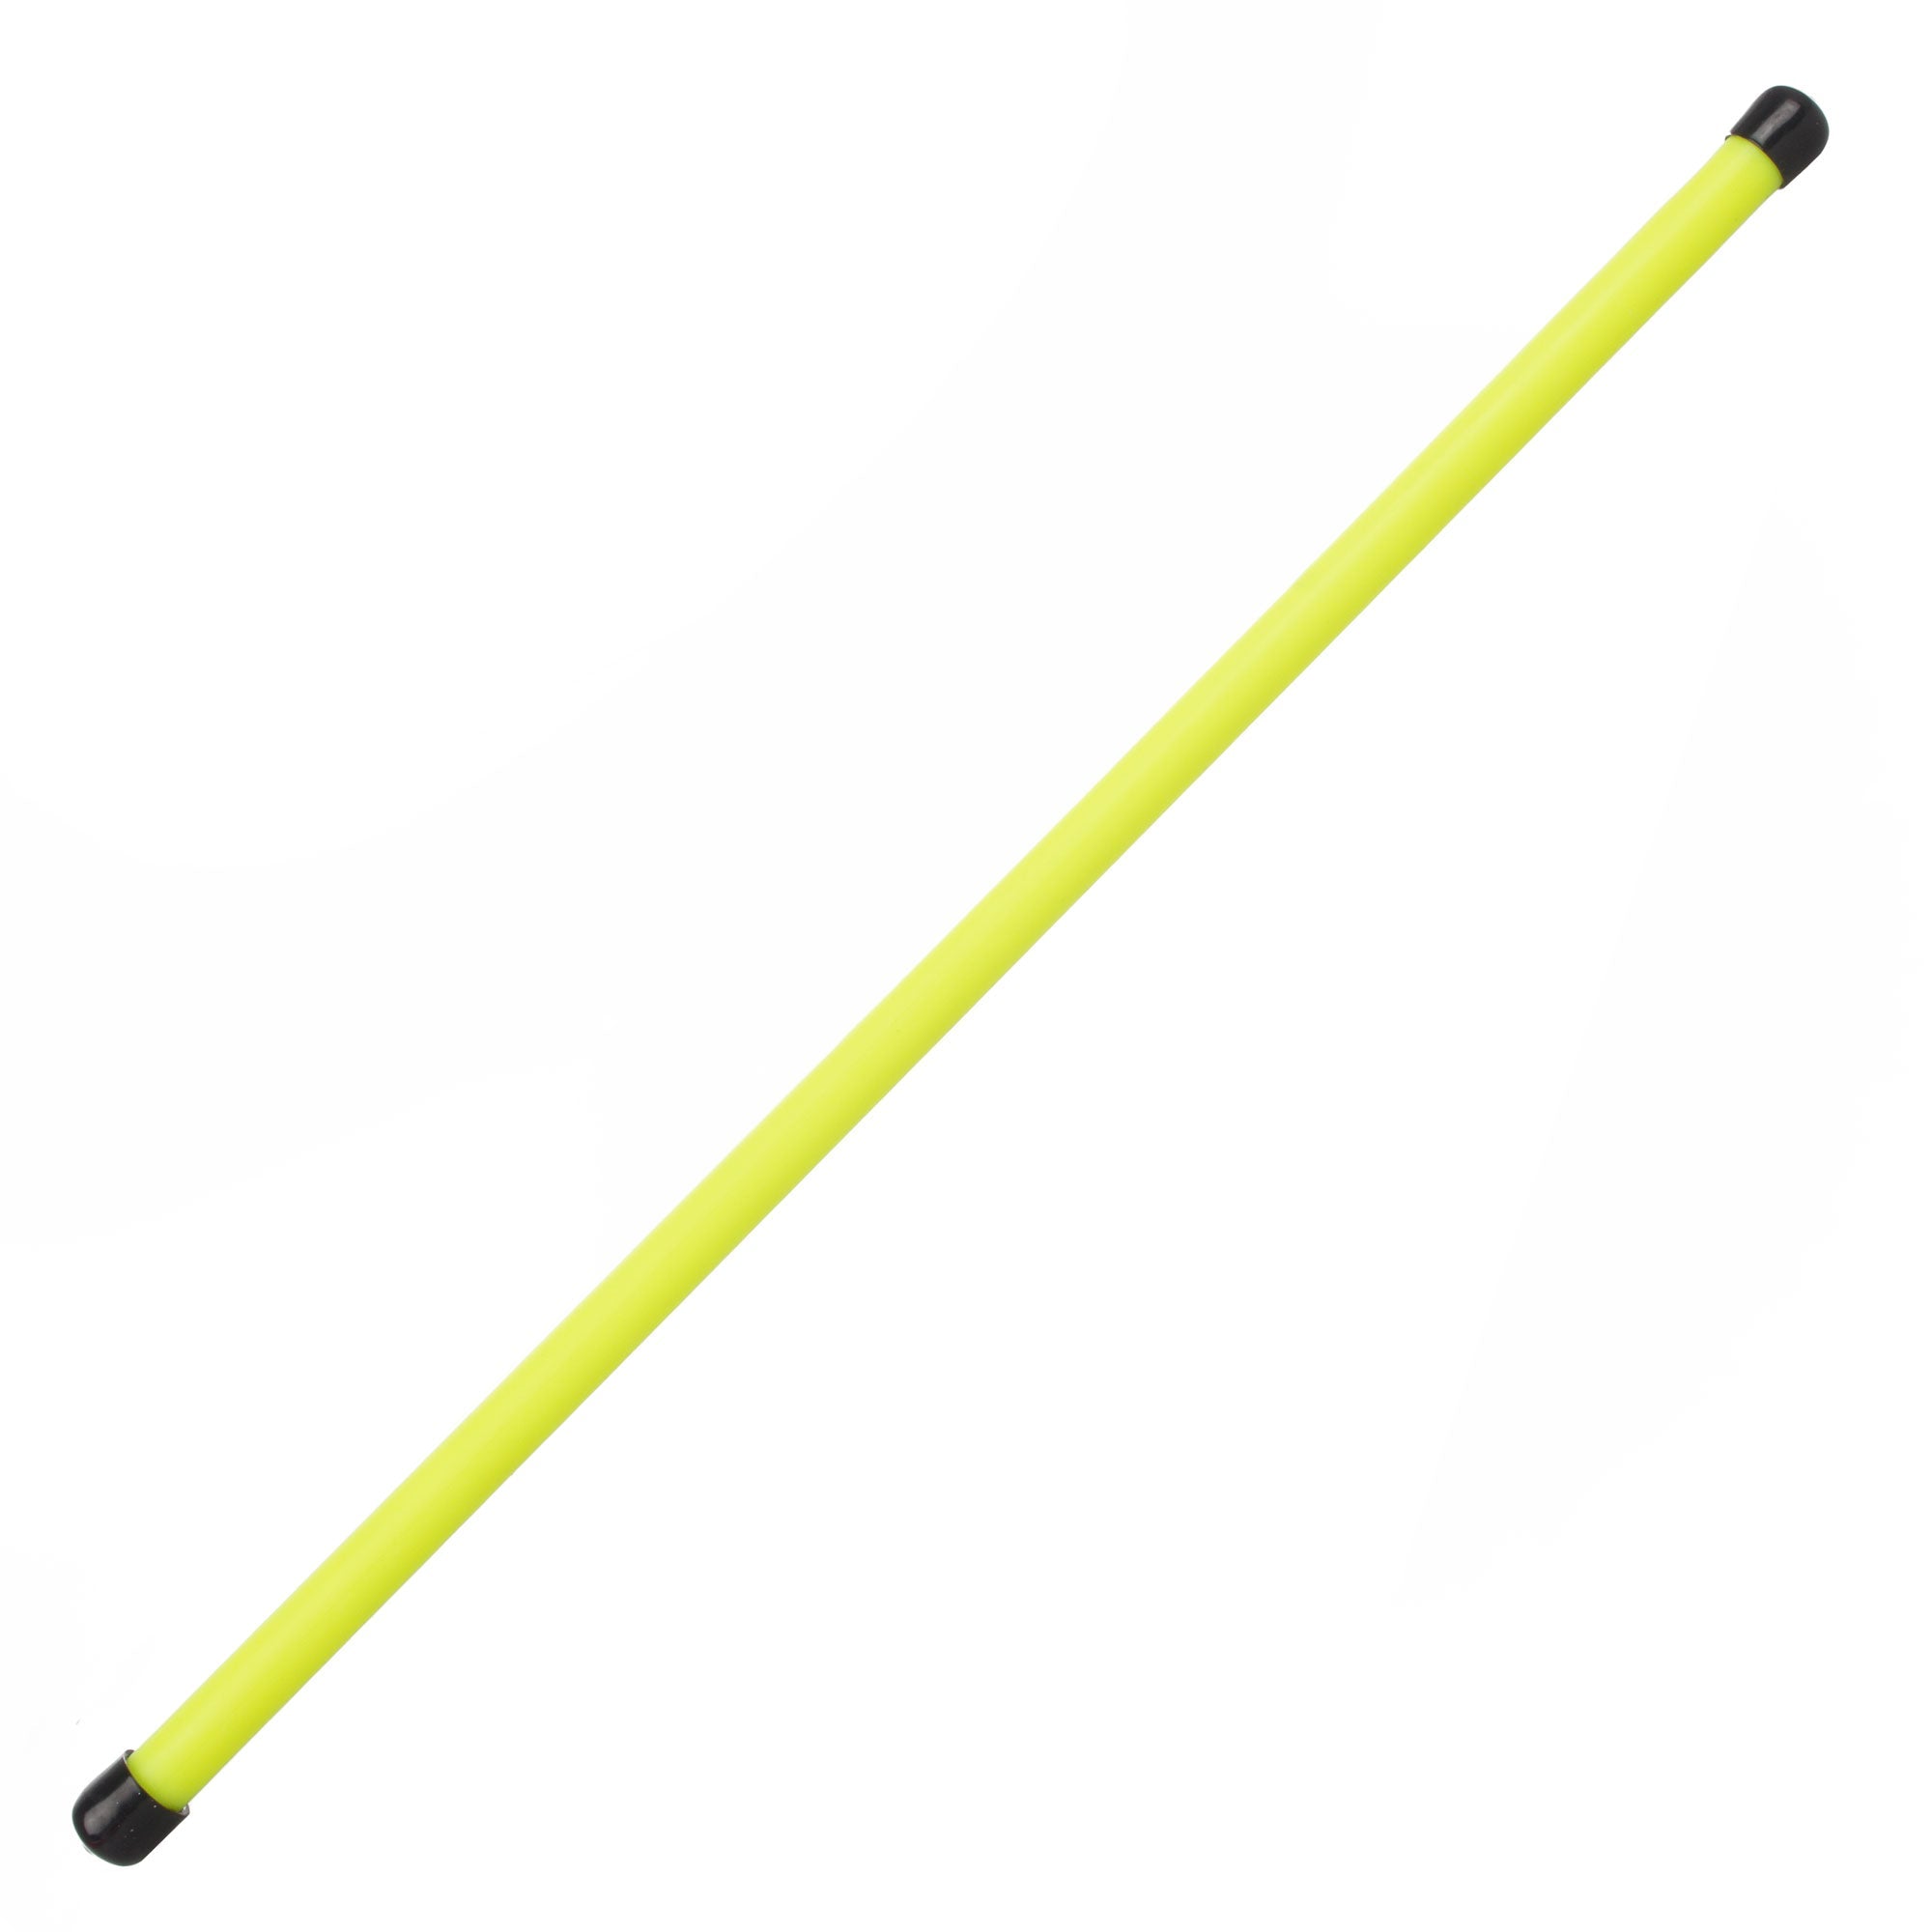 A UV yellow devilstick handstick with black caps on each end